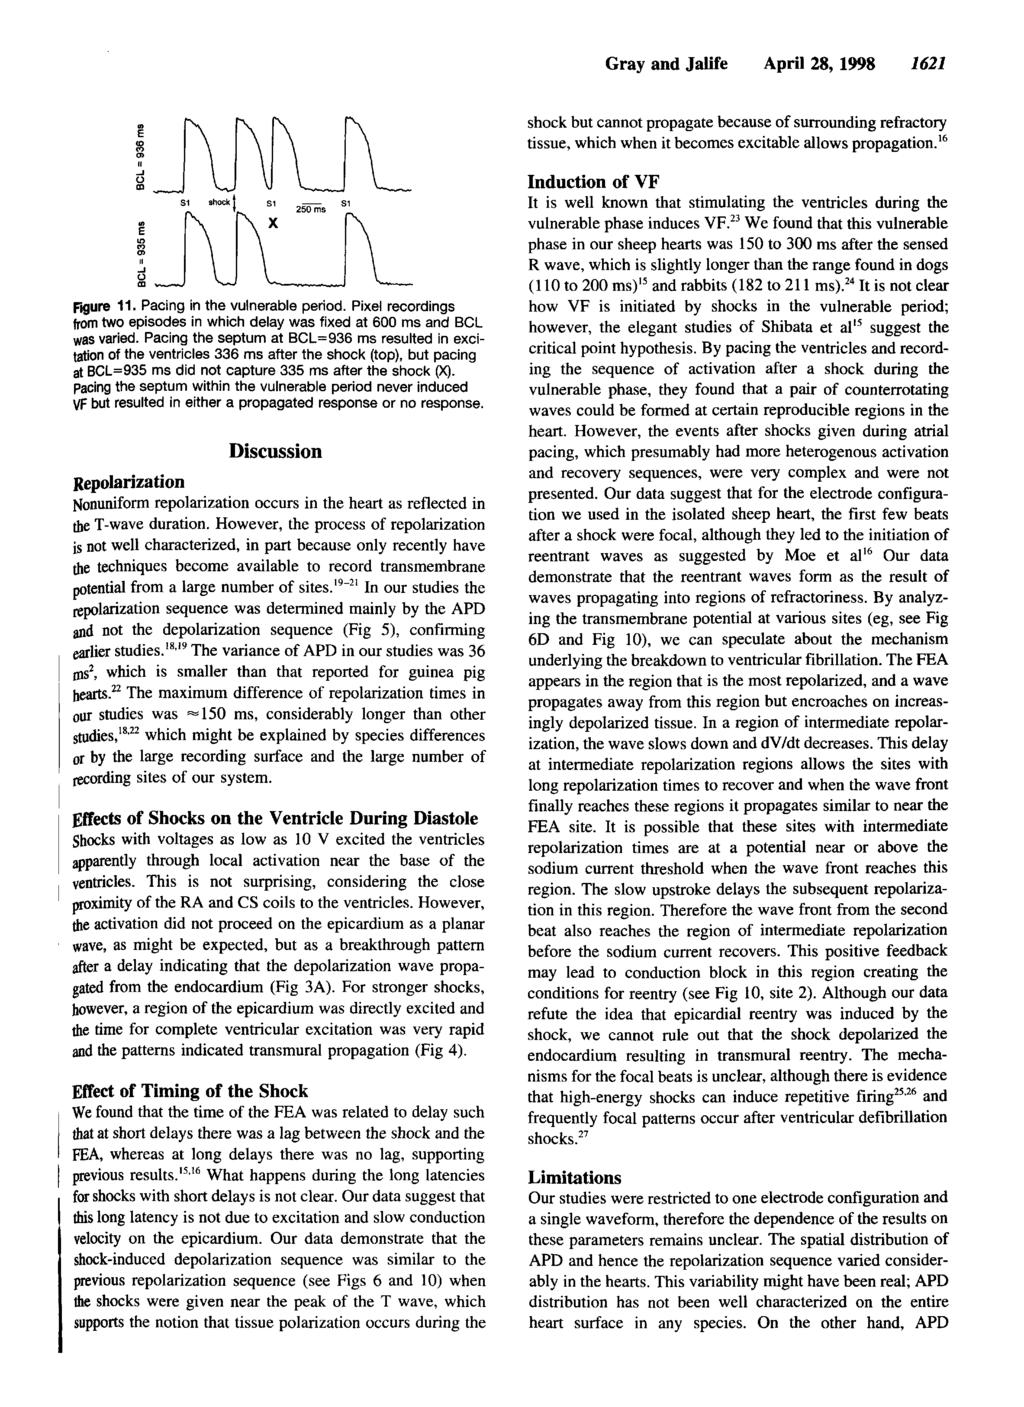 Gray and Jalife April 28, 1998 1621 Figure 11. Pacing in the vulnerable period. Pixel recordings from two episodes in which delay was fixed at 600 ms and BCL was varied.